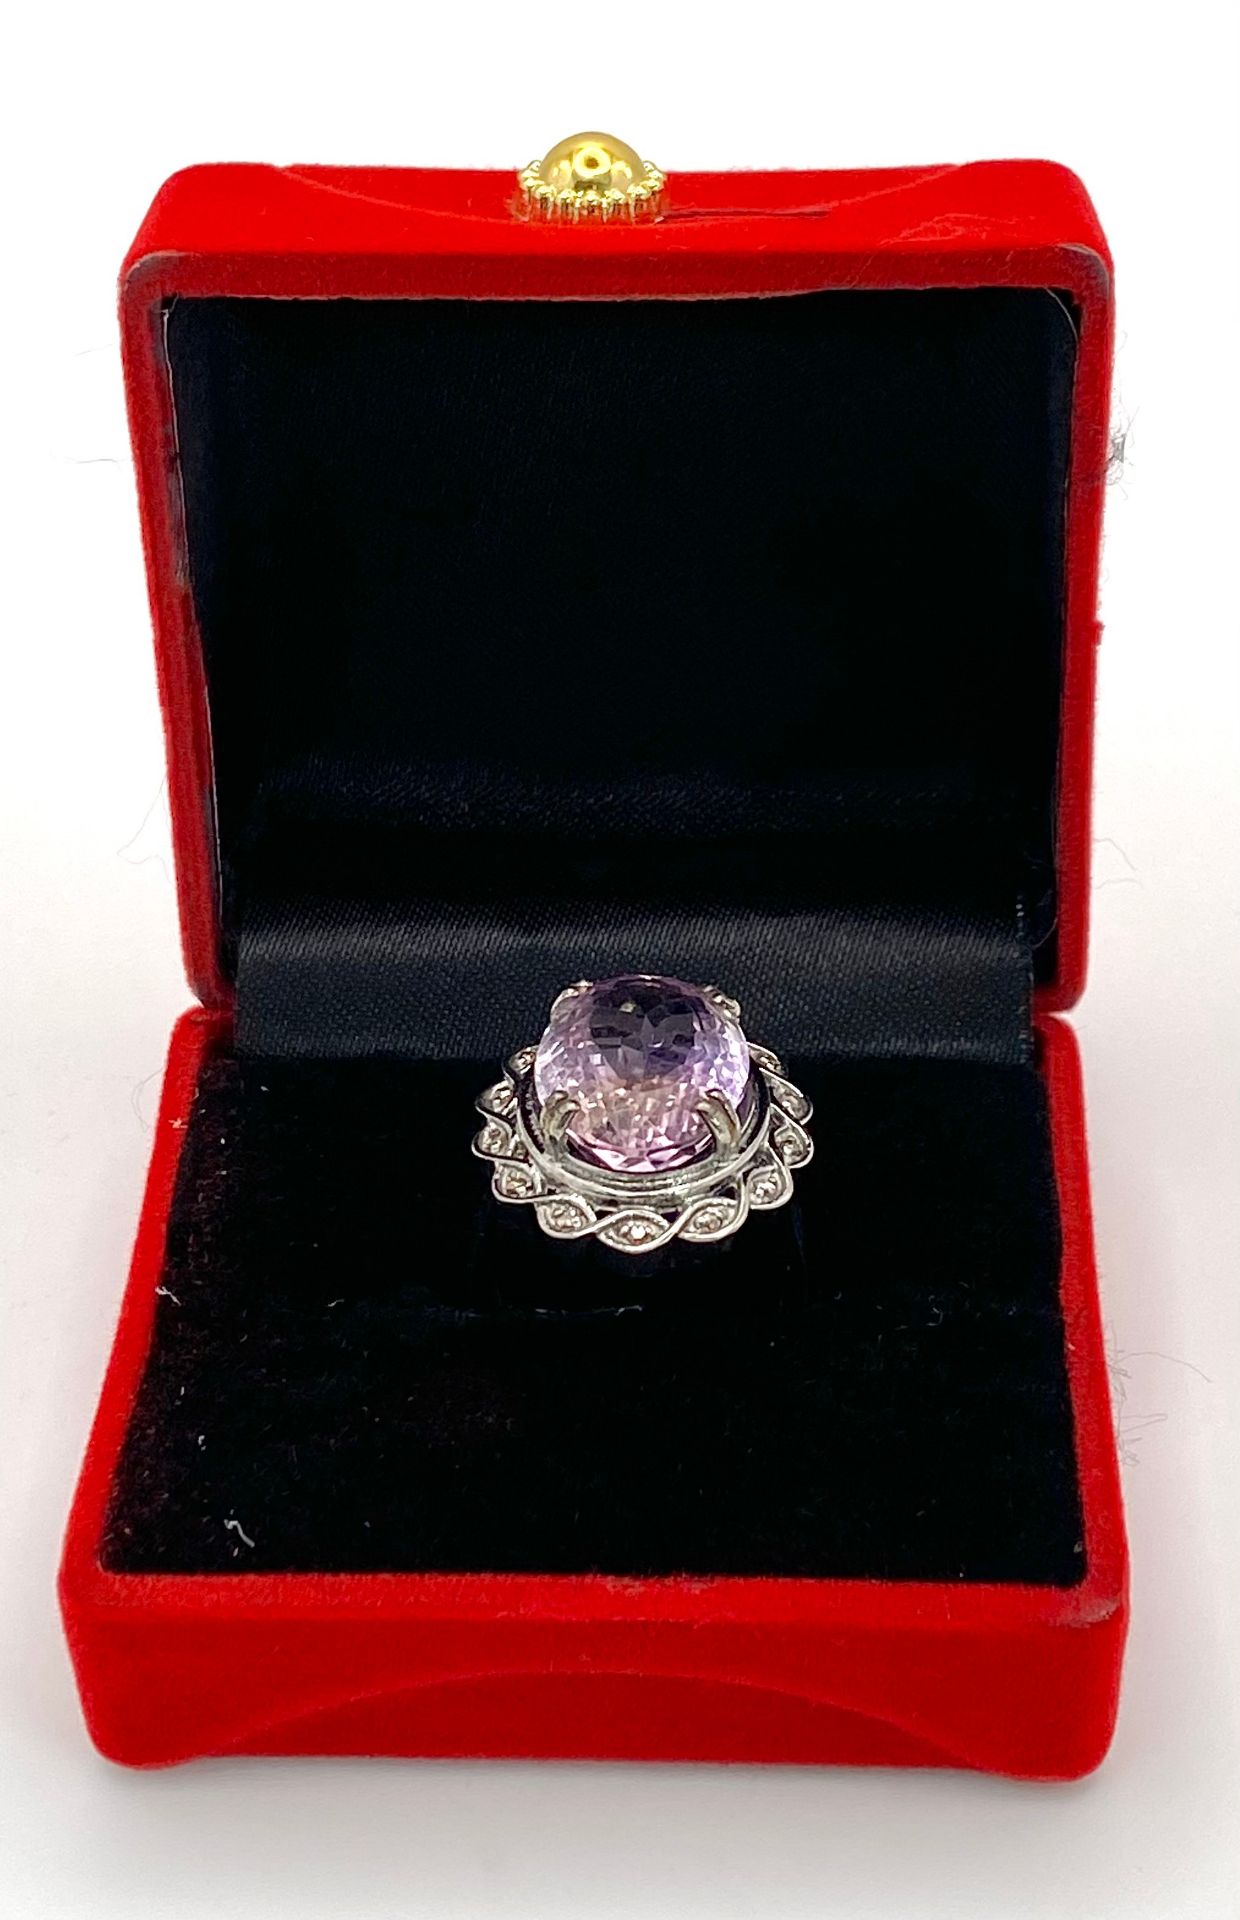 An 11.65ct Amethyst Ring with 0.25ctw of Diamond Accents. Set in 925 Silver. Size N. 9.4g total - Image 5 of 6